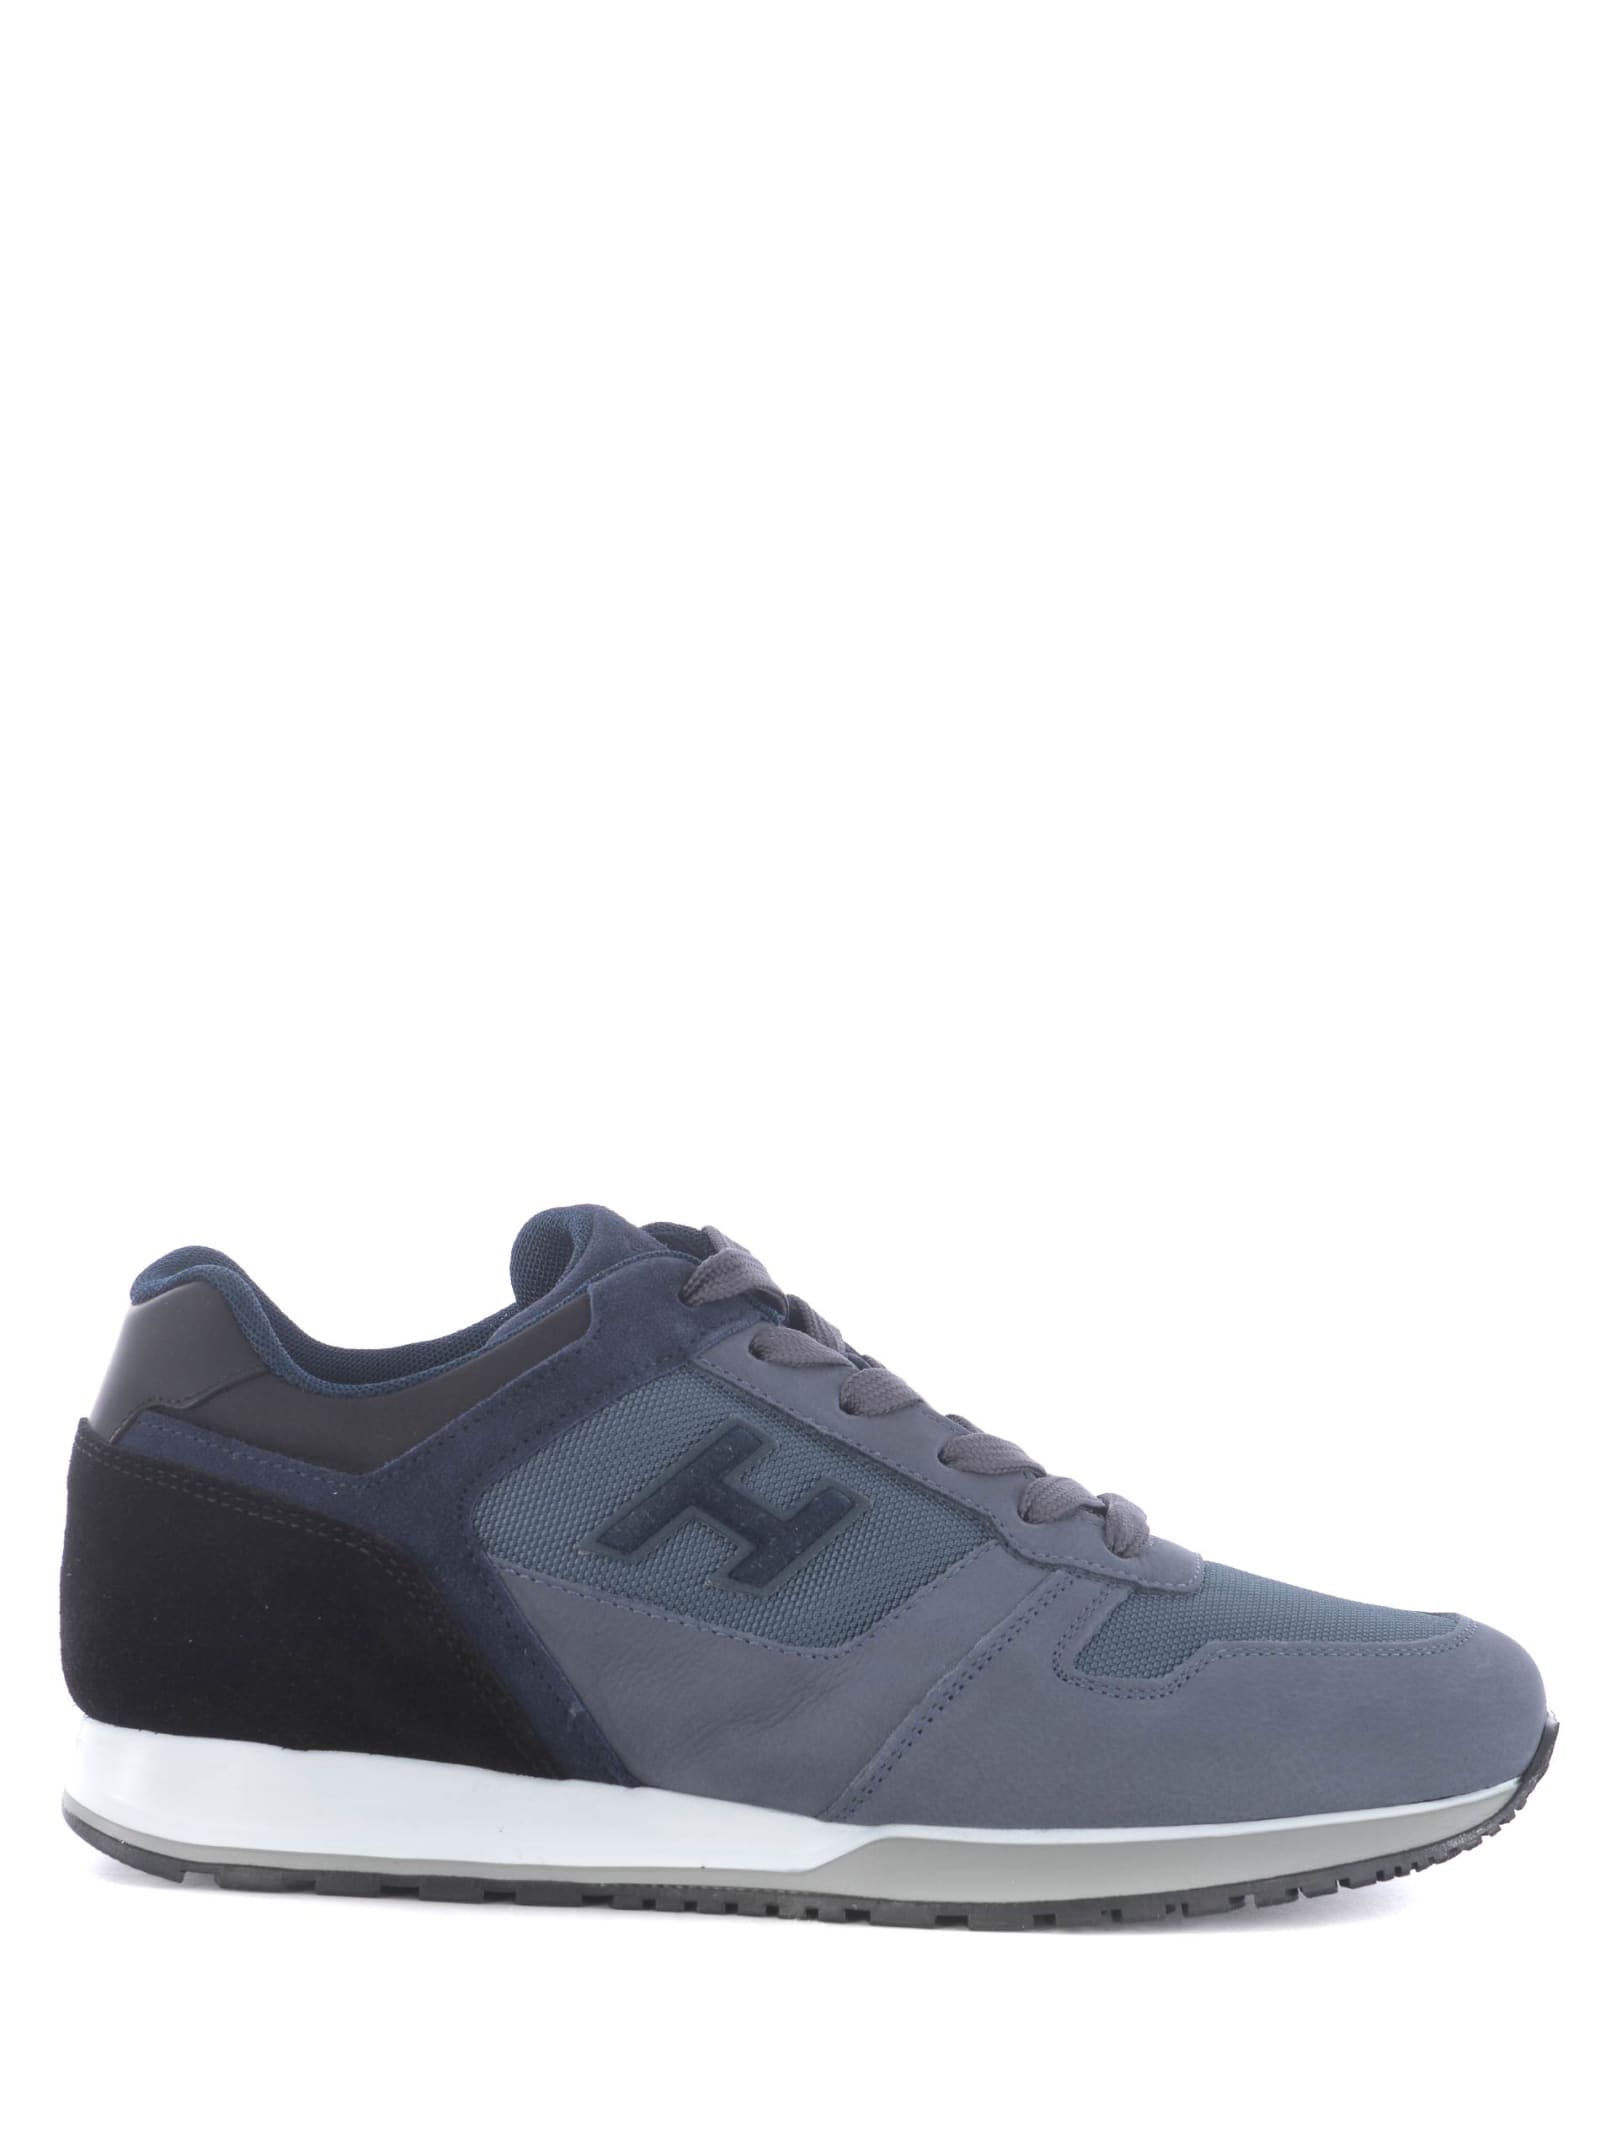 Hogan h321 Sneakers In Suede And Nylon